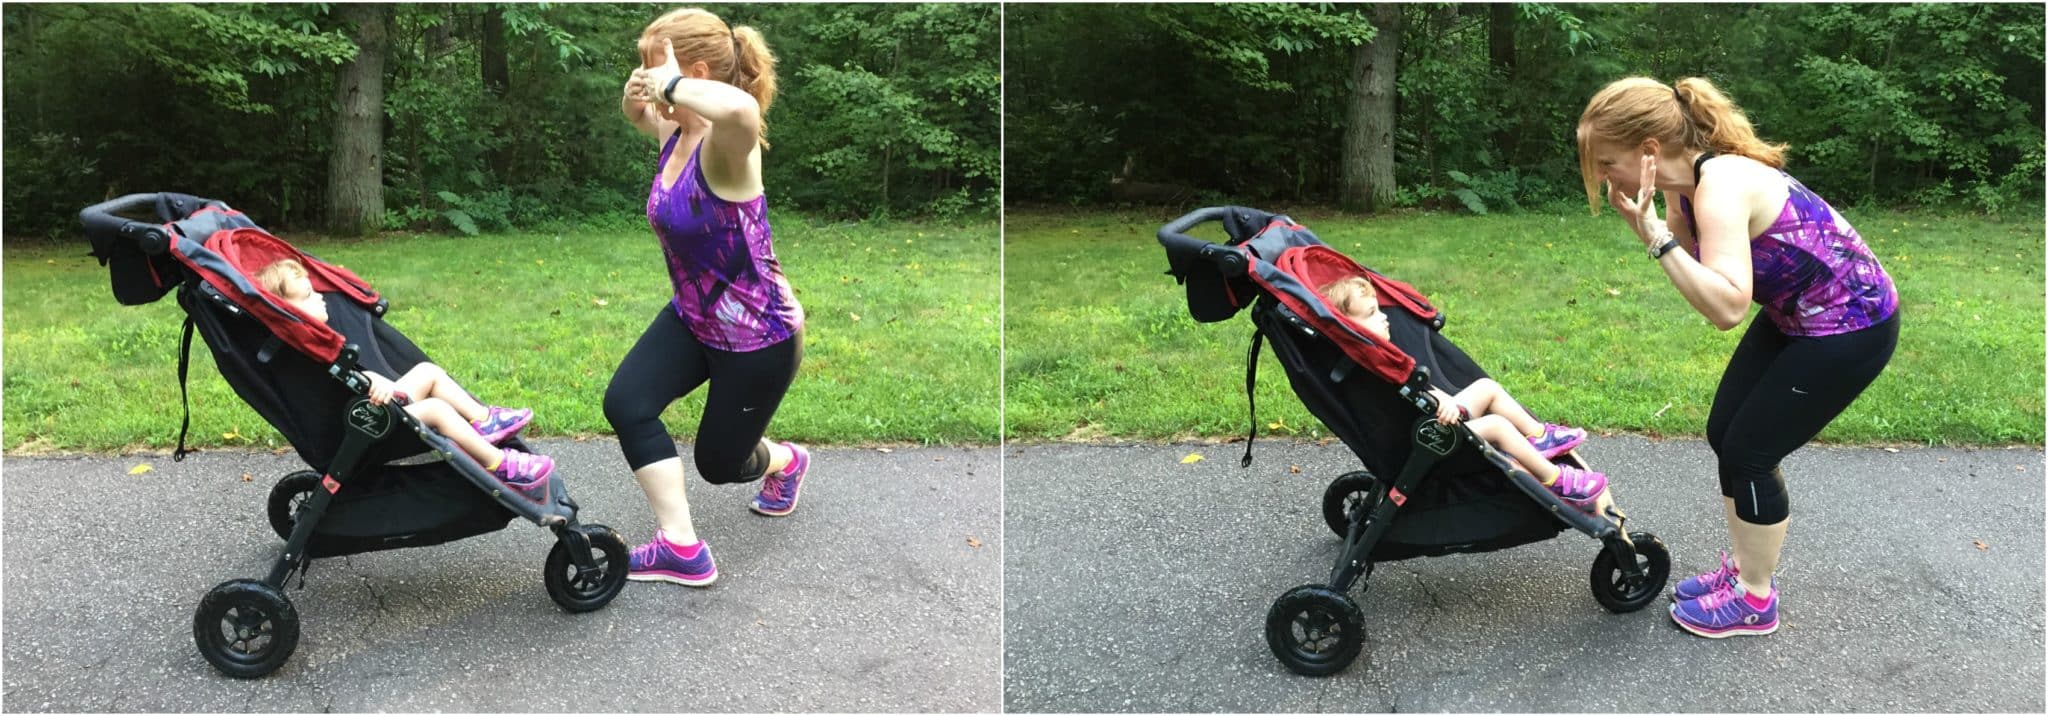 Take your baby on your next workout! This strength training workout requires a stroller and that's it. Double duty, baby!